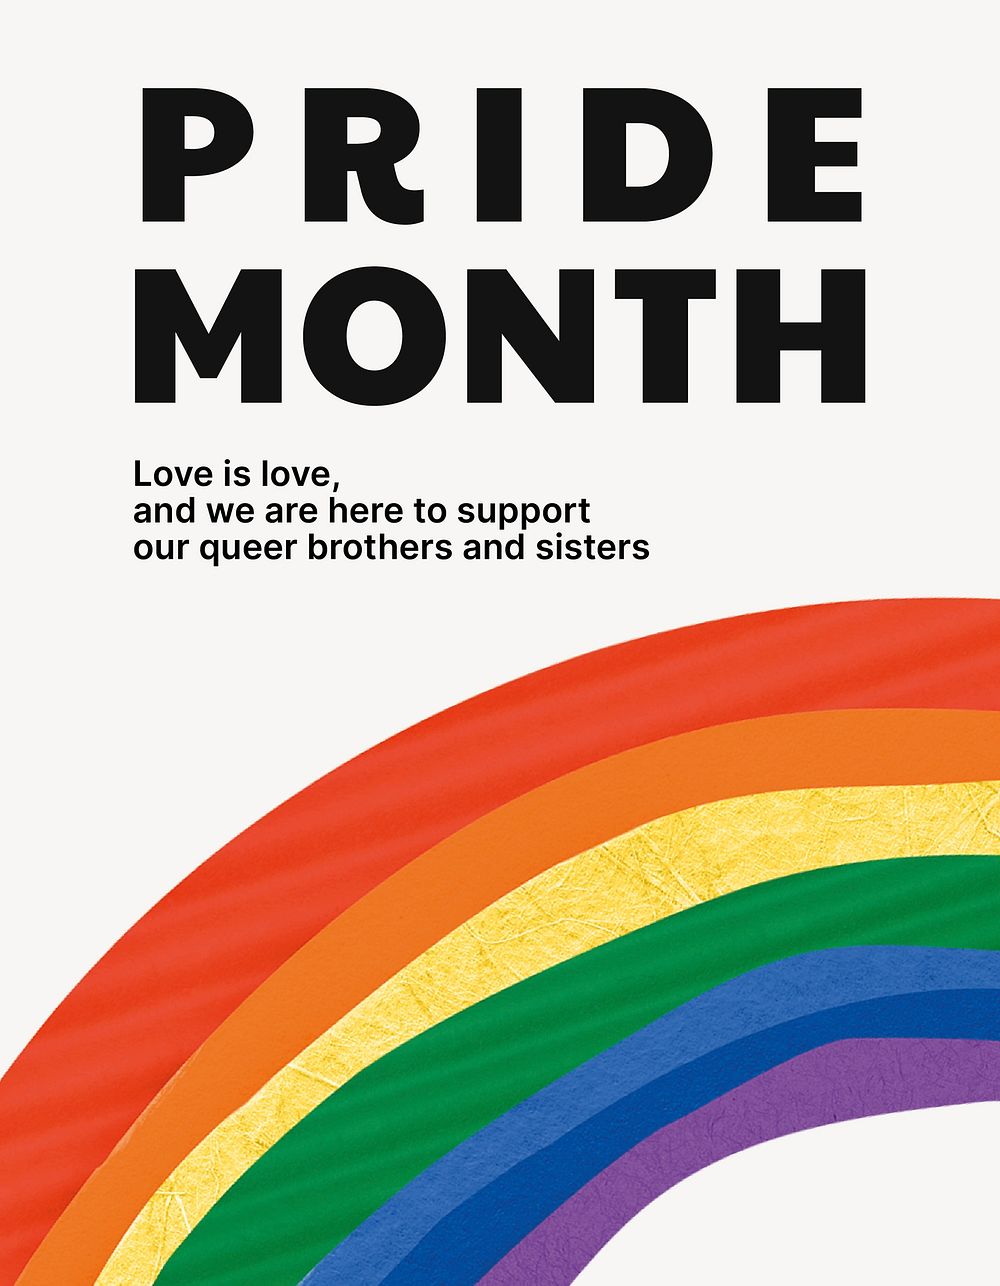 Pride month rainbow flyer template, LGBTQ community support campaign vector